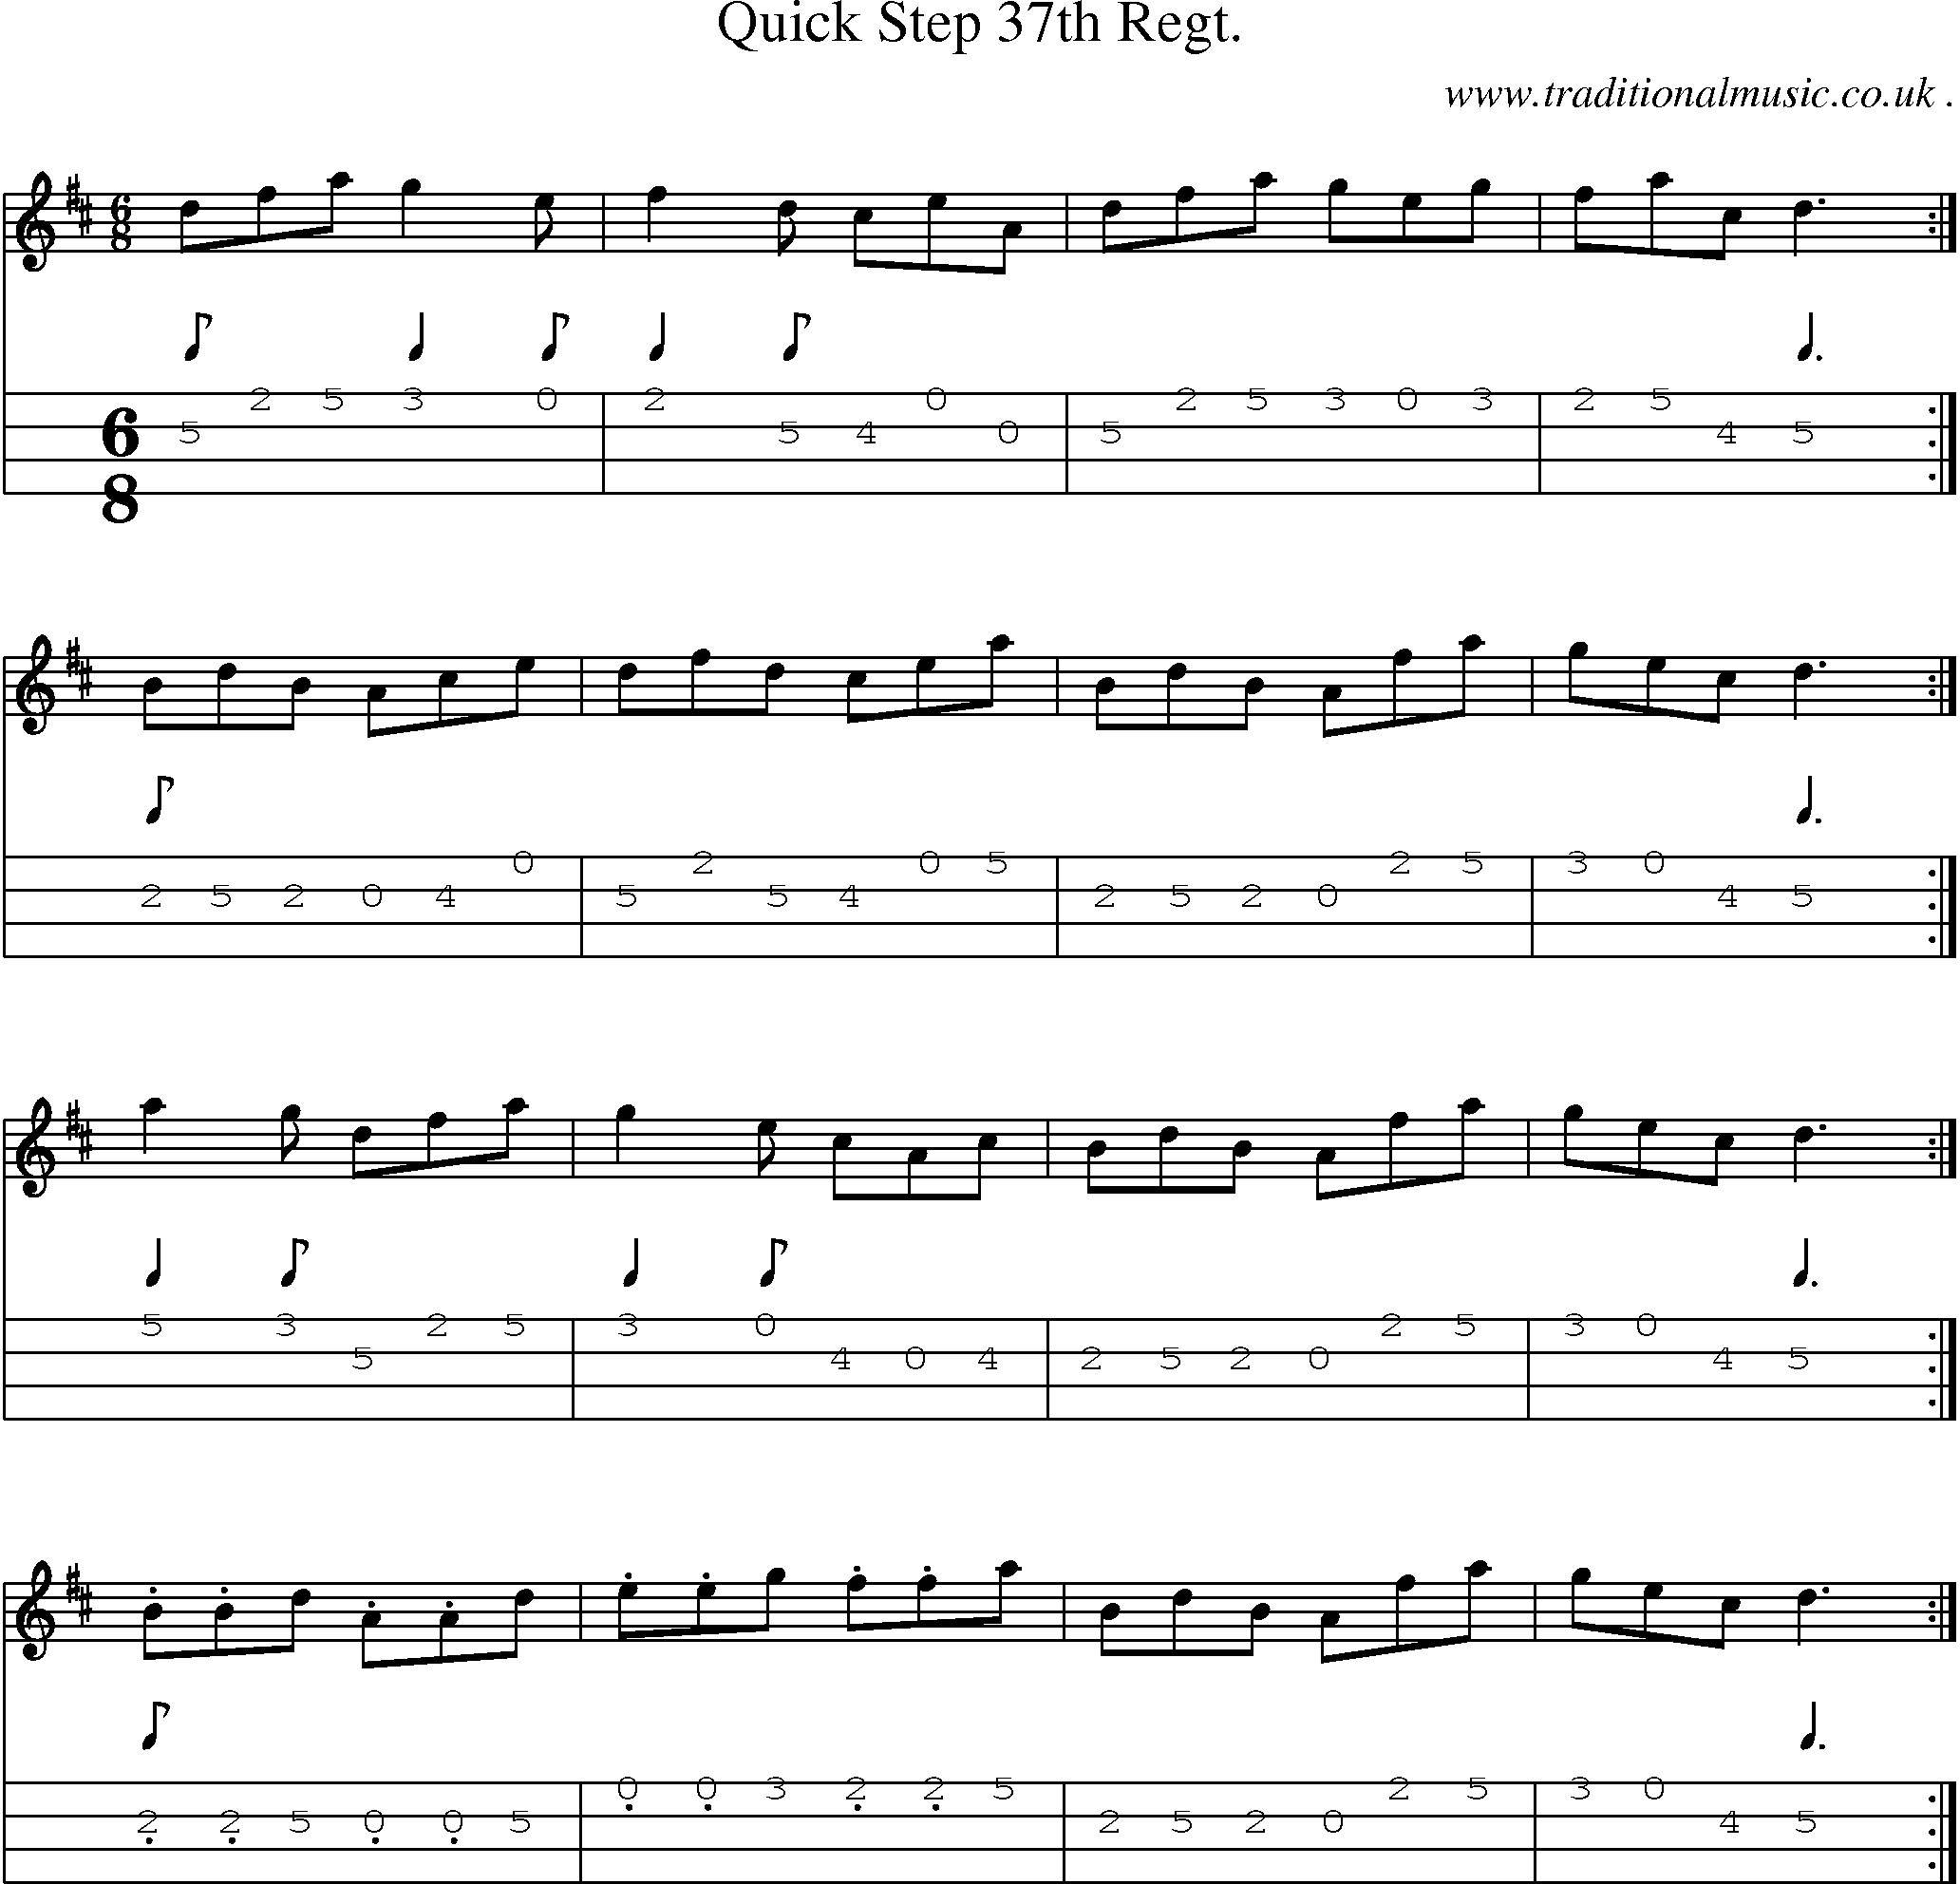 Sheet-Music and Mandolin Tabs for Quick Step 37th Regt